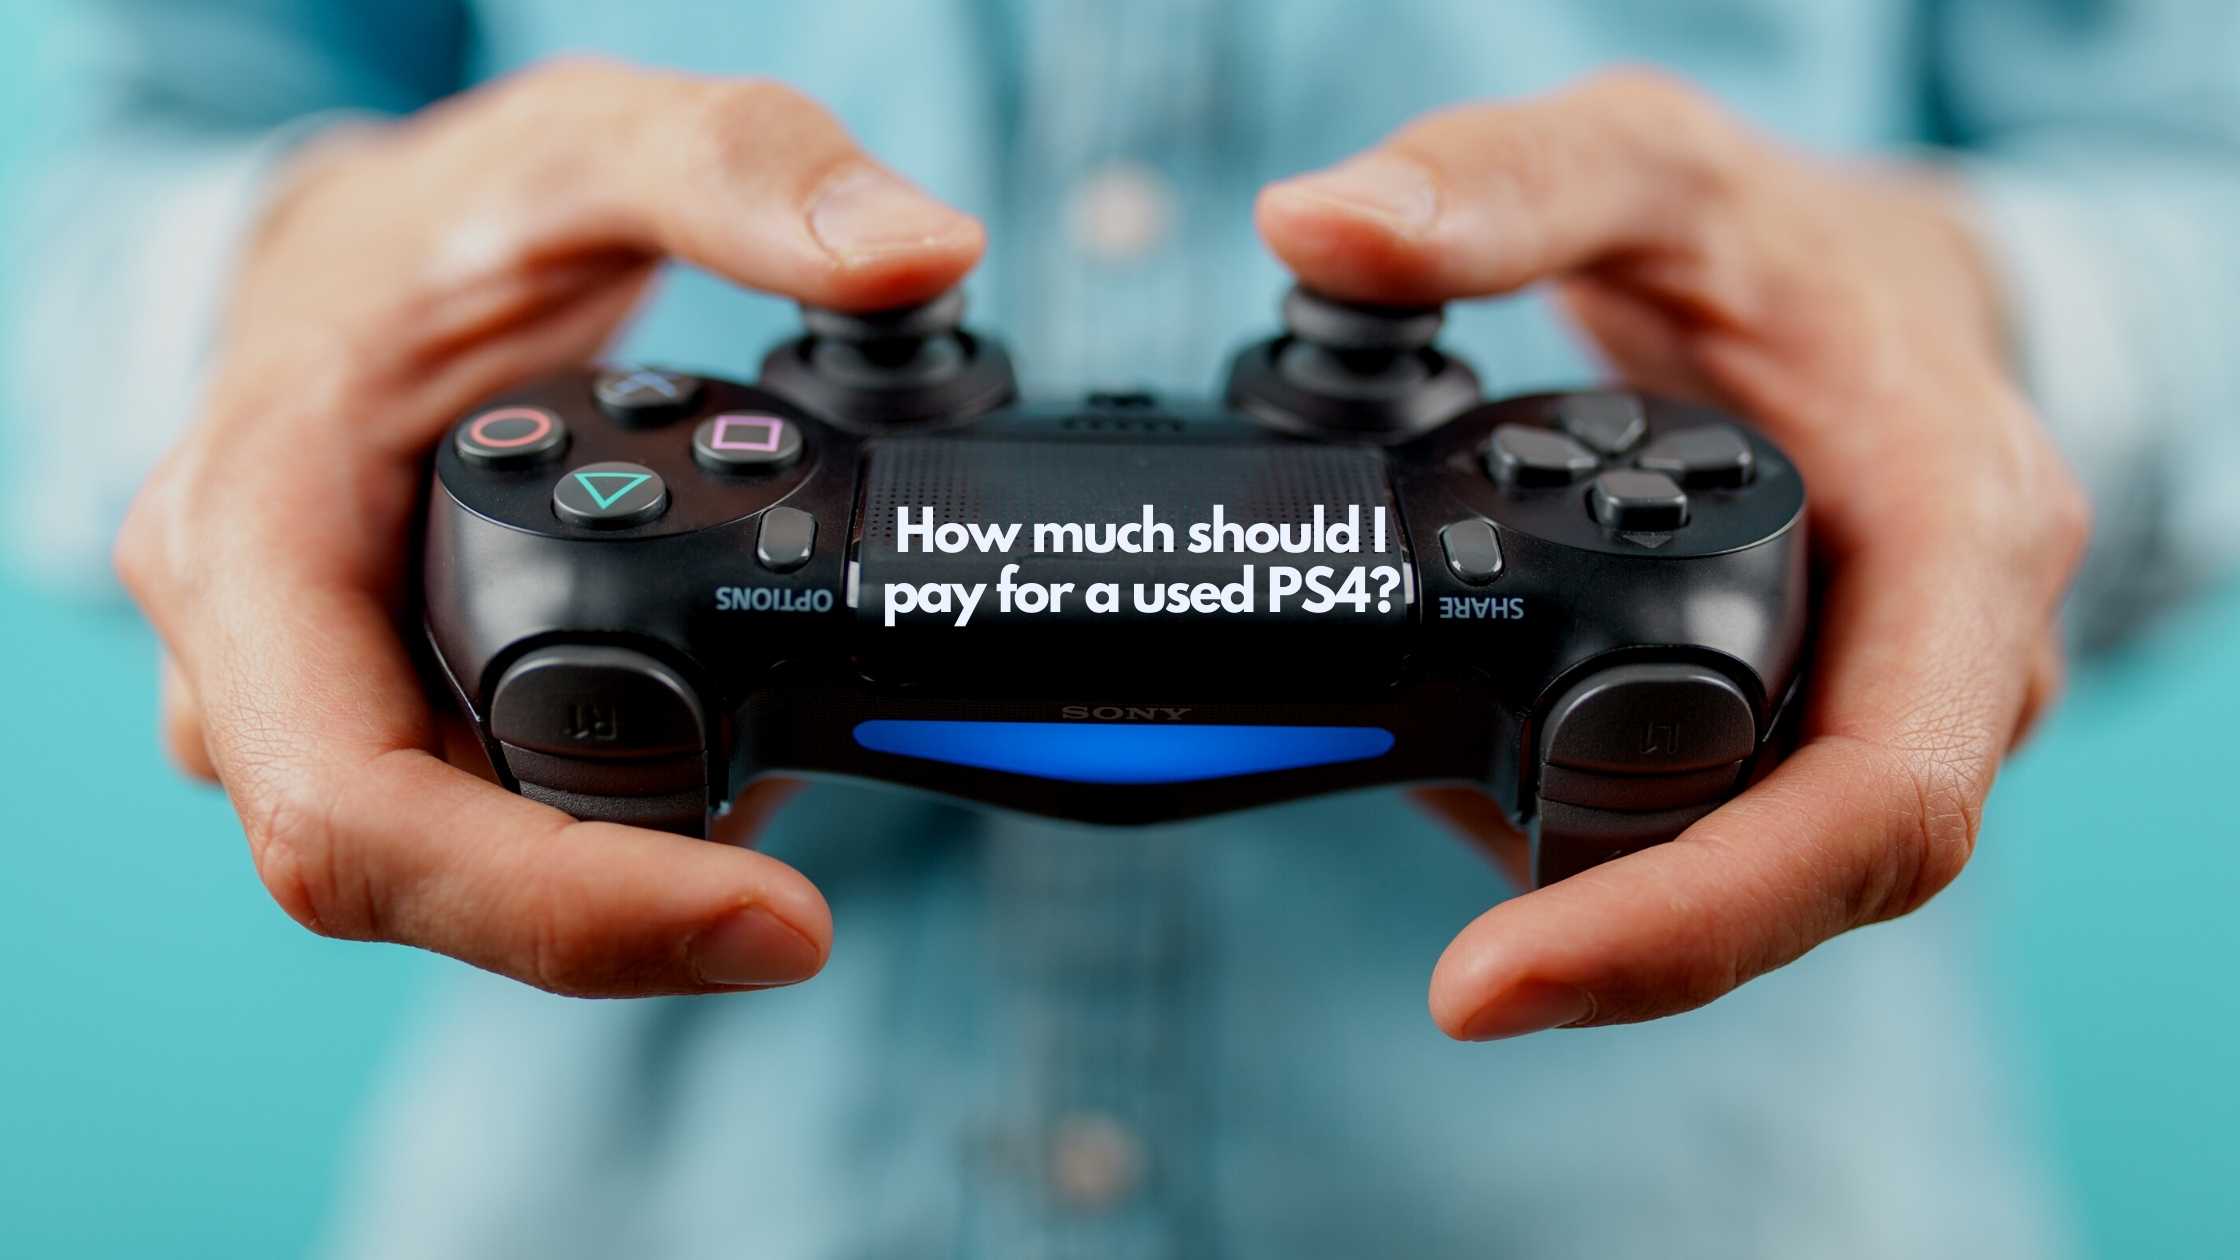 where to buy second hand ps4 games